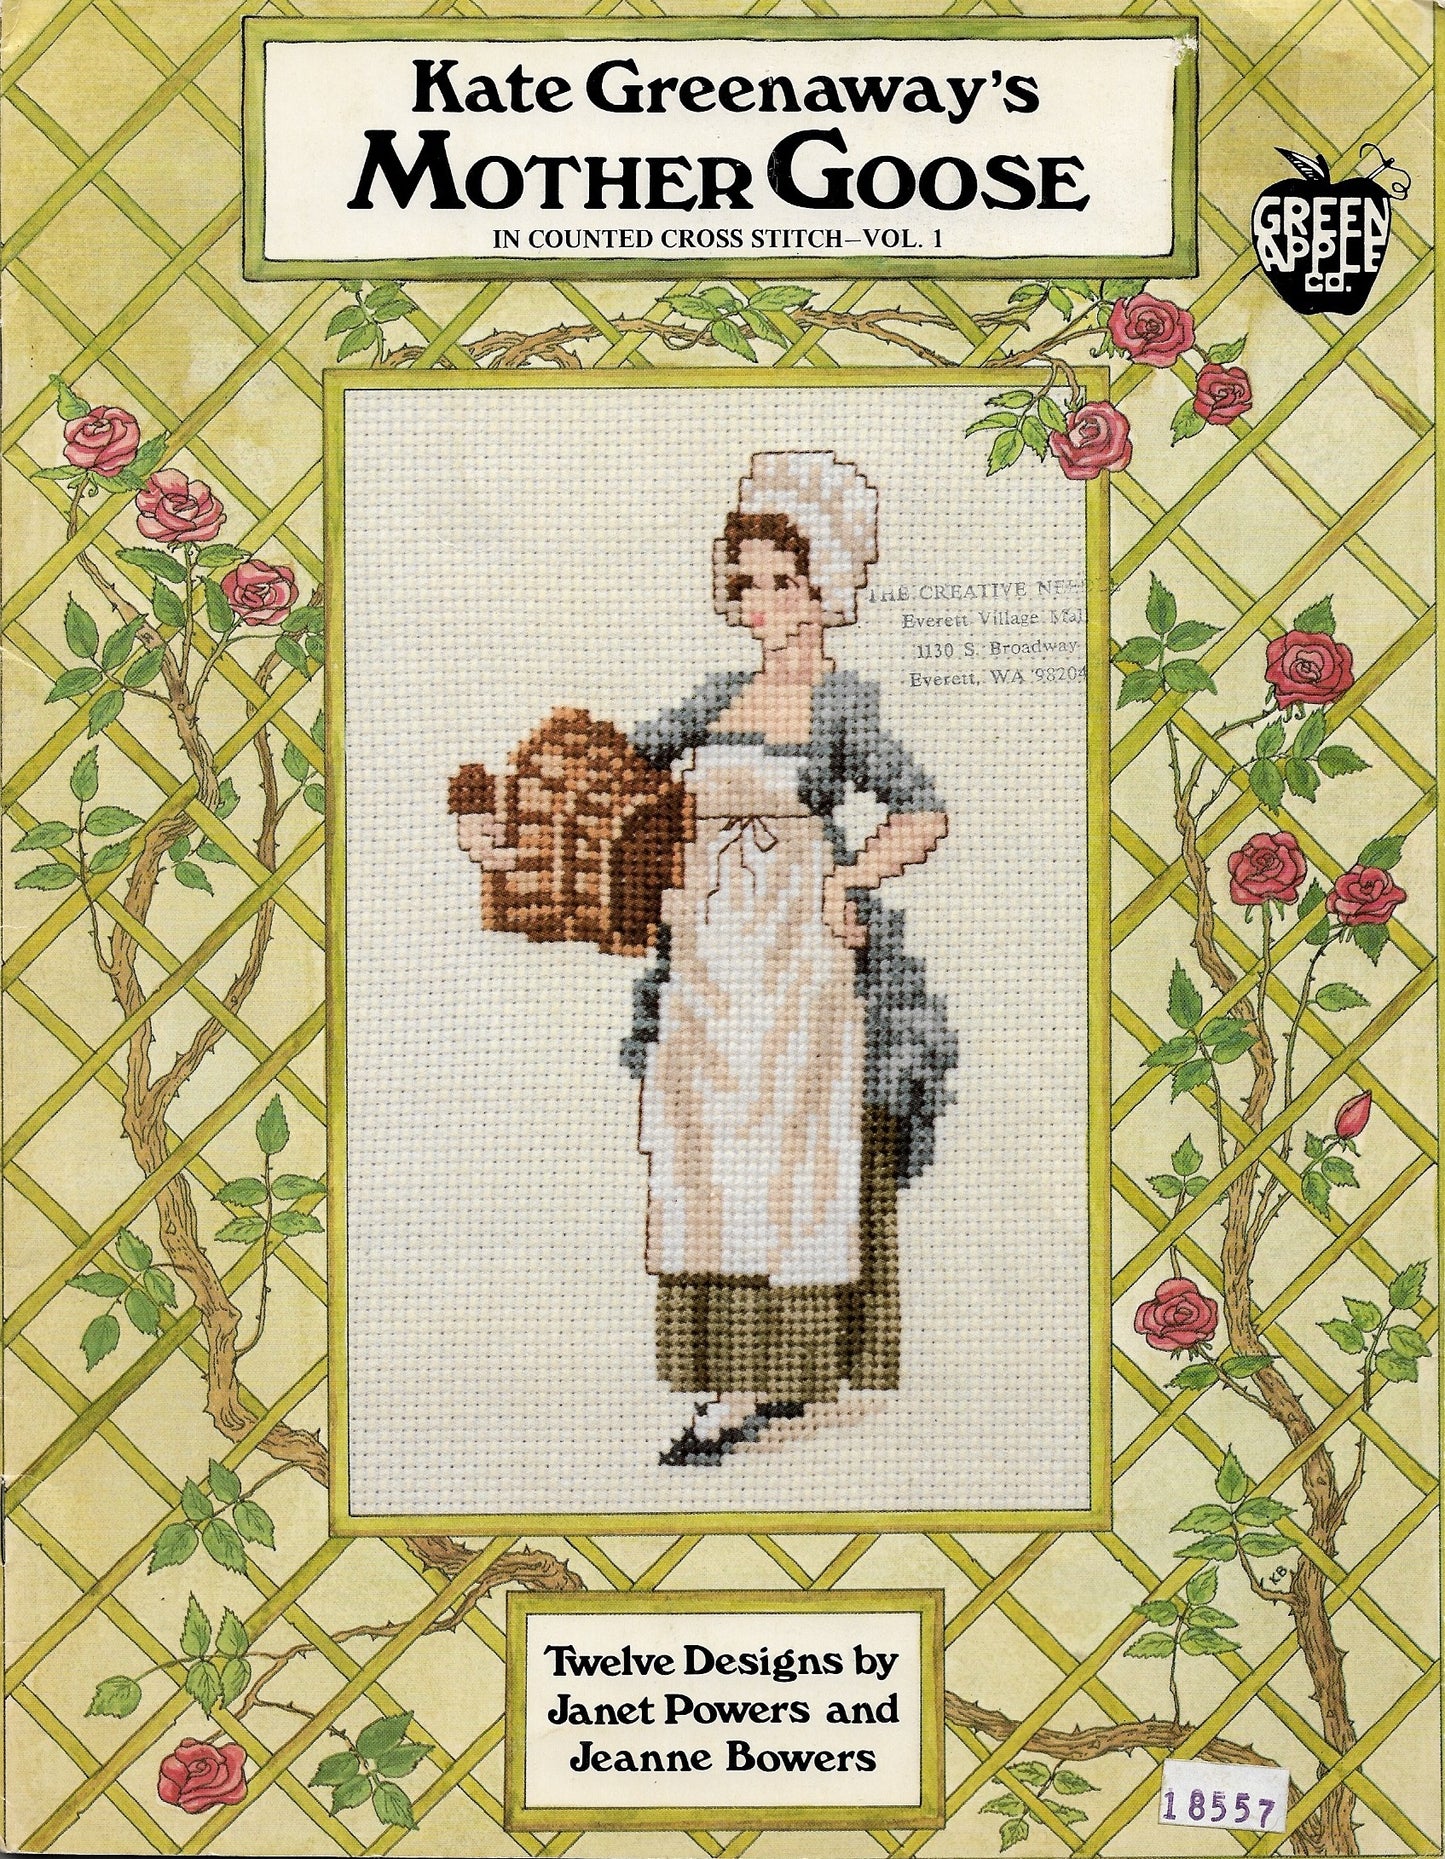 Green Apple Mother Goose childrens fable cross stitch pattern